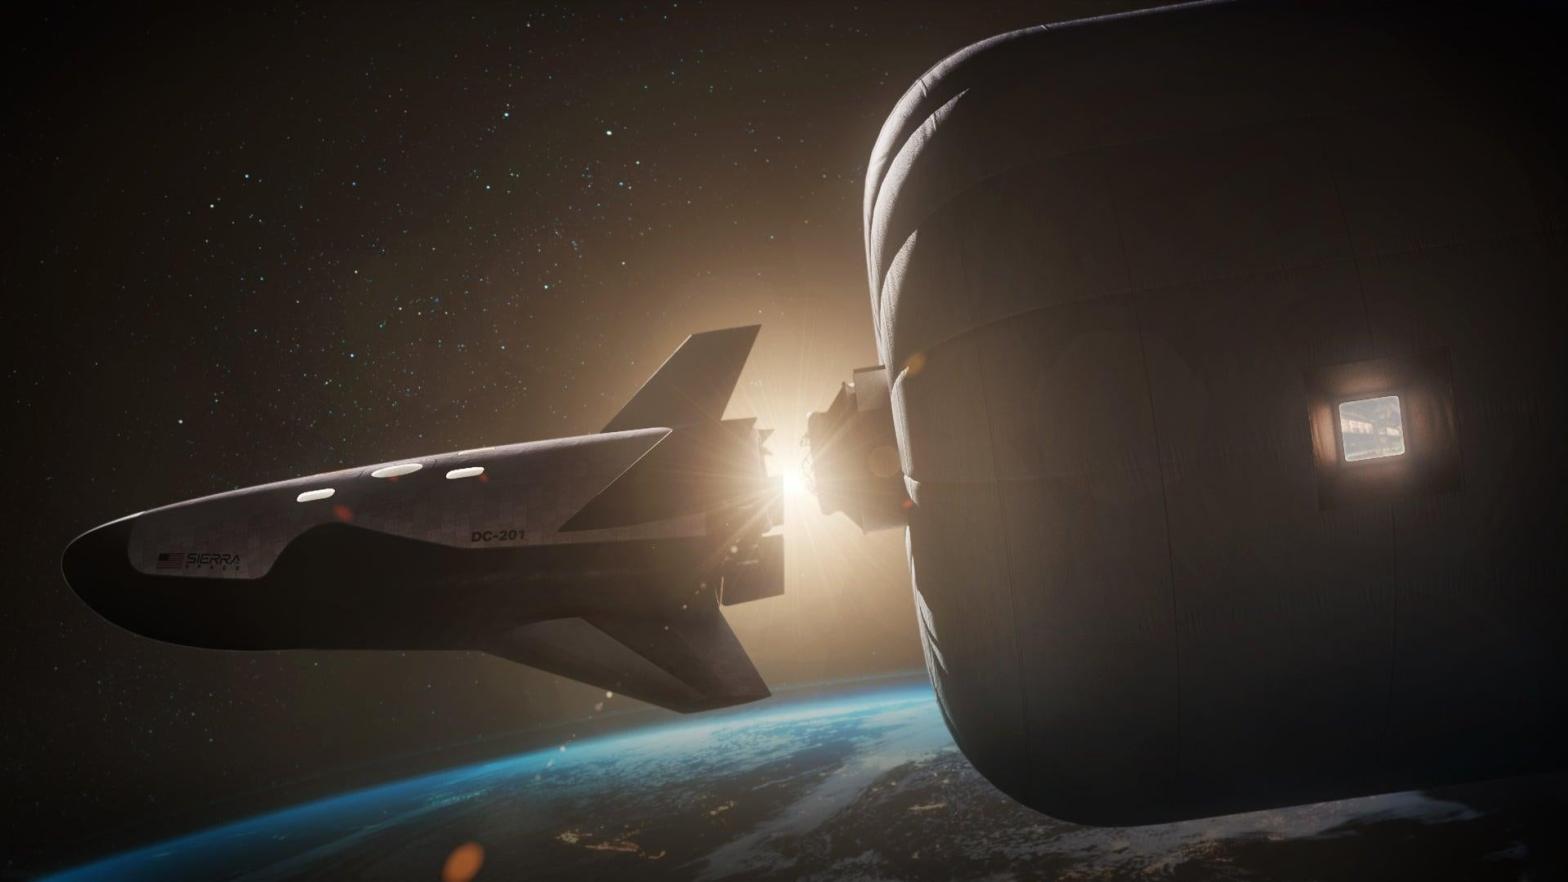 An illustration of Sierra Space's (one of the 7 companies selected) crewed Dream Chaser spaceplane docking to the LIFE habitat. (Illustration: Sierra Space)